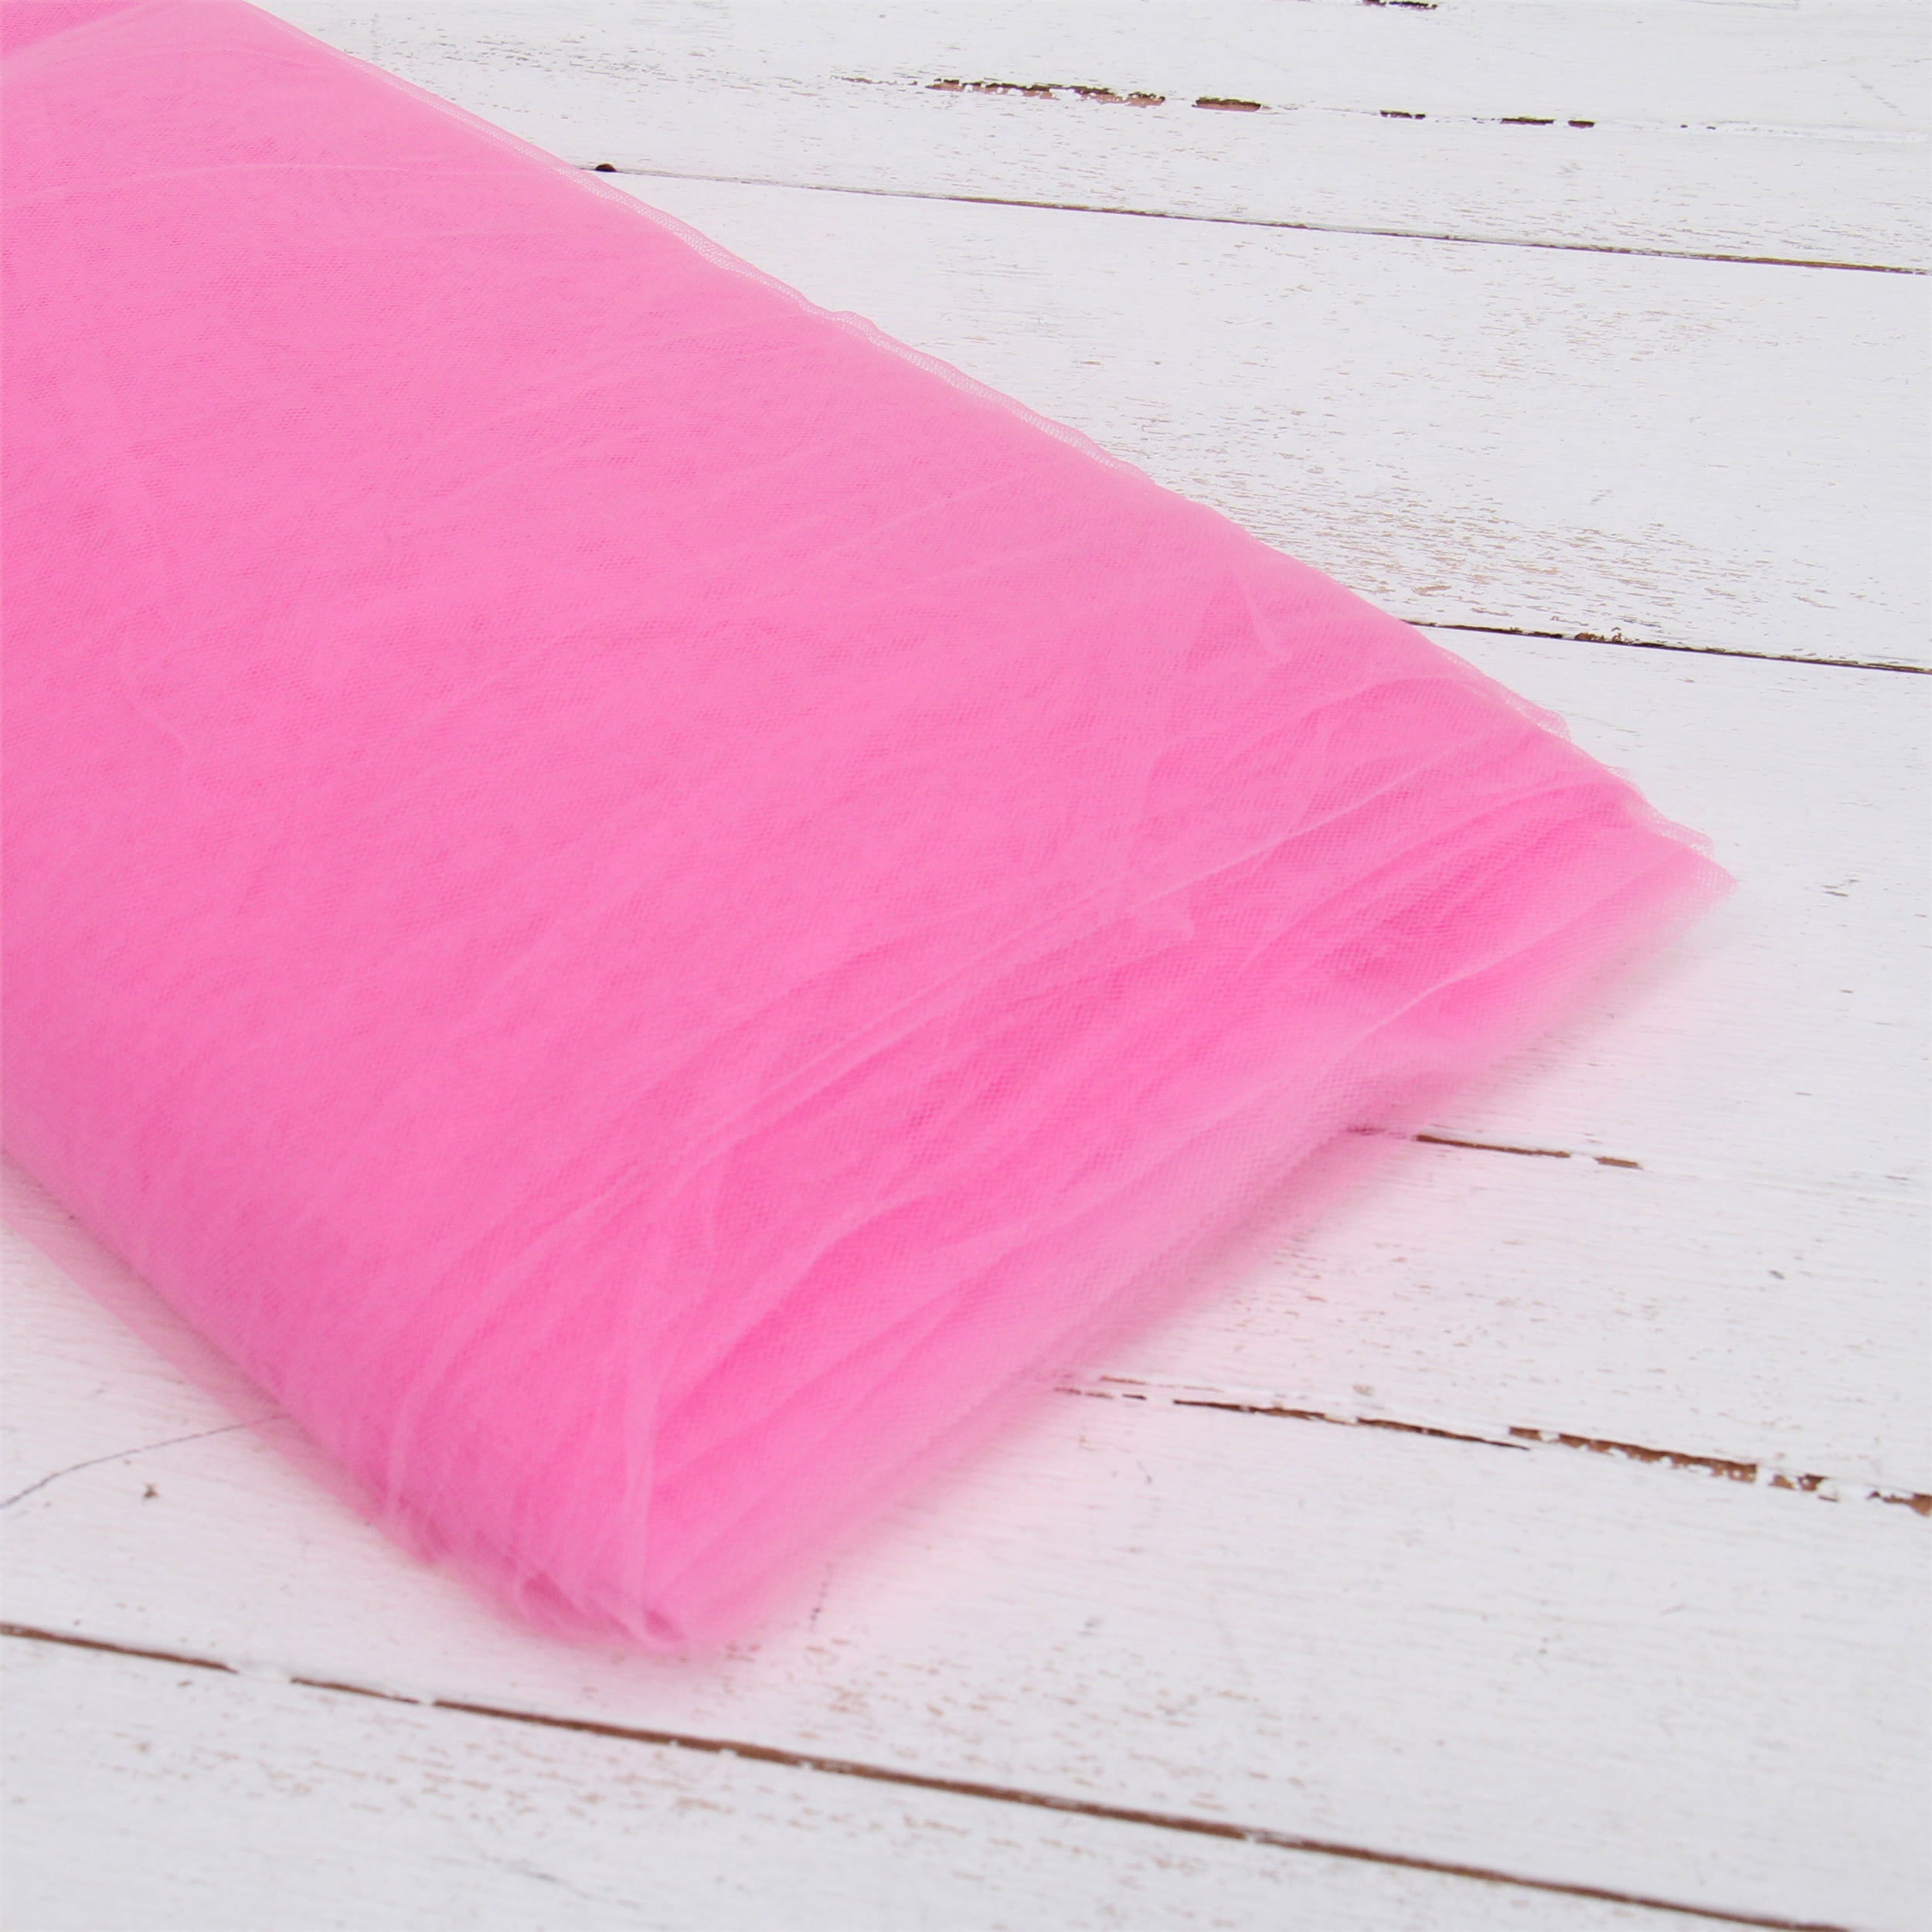 Wholesale 90 Wide Muslin Fabric Dyed Pink 25 yard bolt